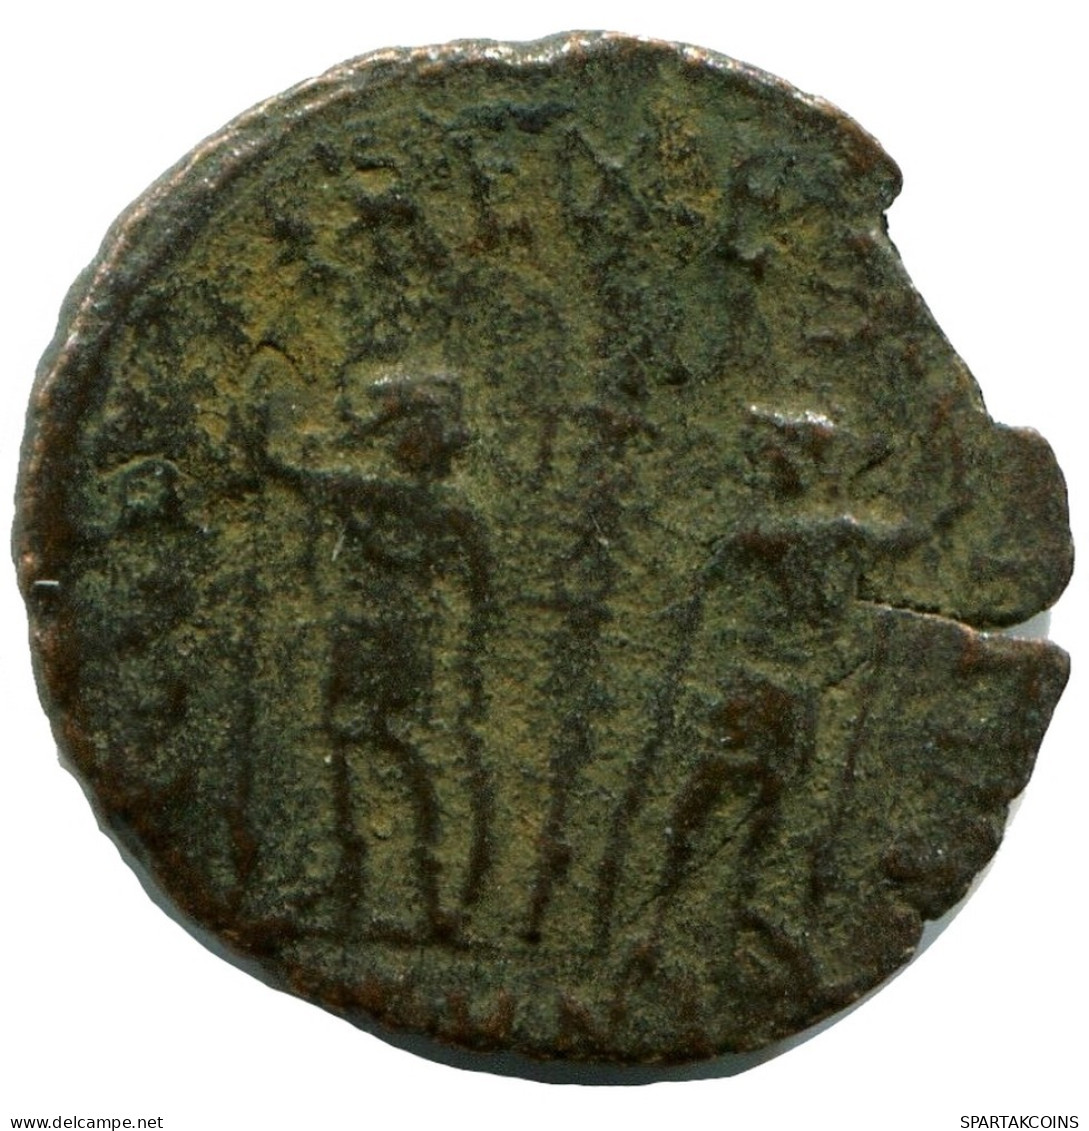 CONSTANTINE I MINTED IN NICOMEDIA FROM THE ROYAL ONTARIO MUSEUM #ANC10950.14.E.A - El Imperio Christiano (307 / 363)